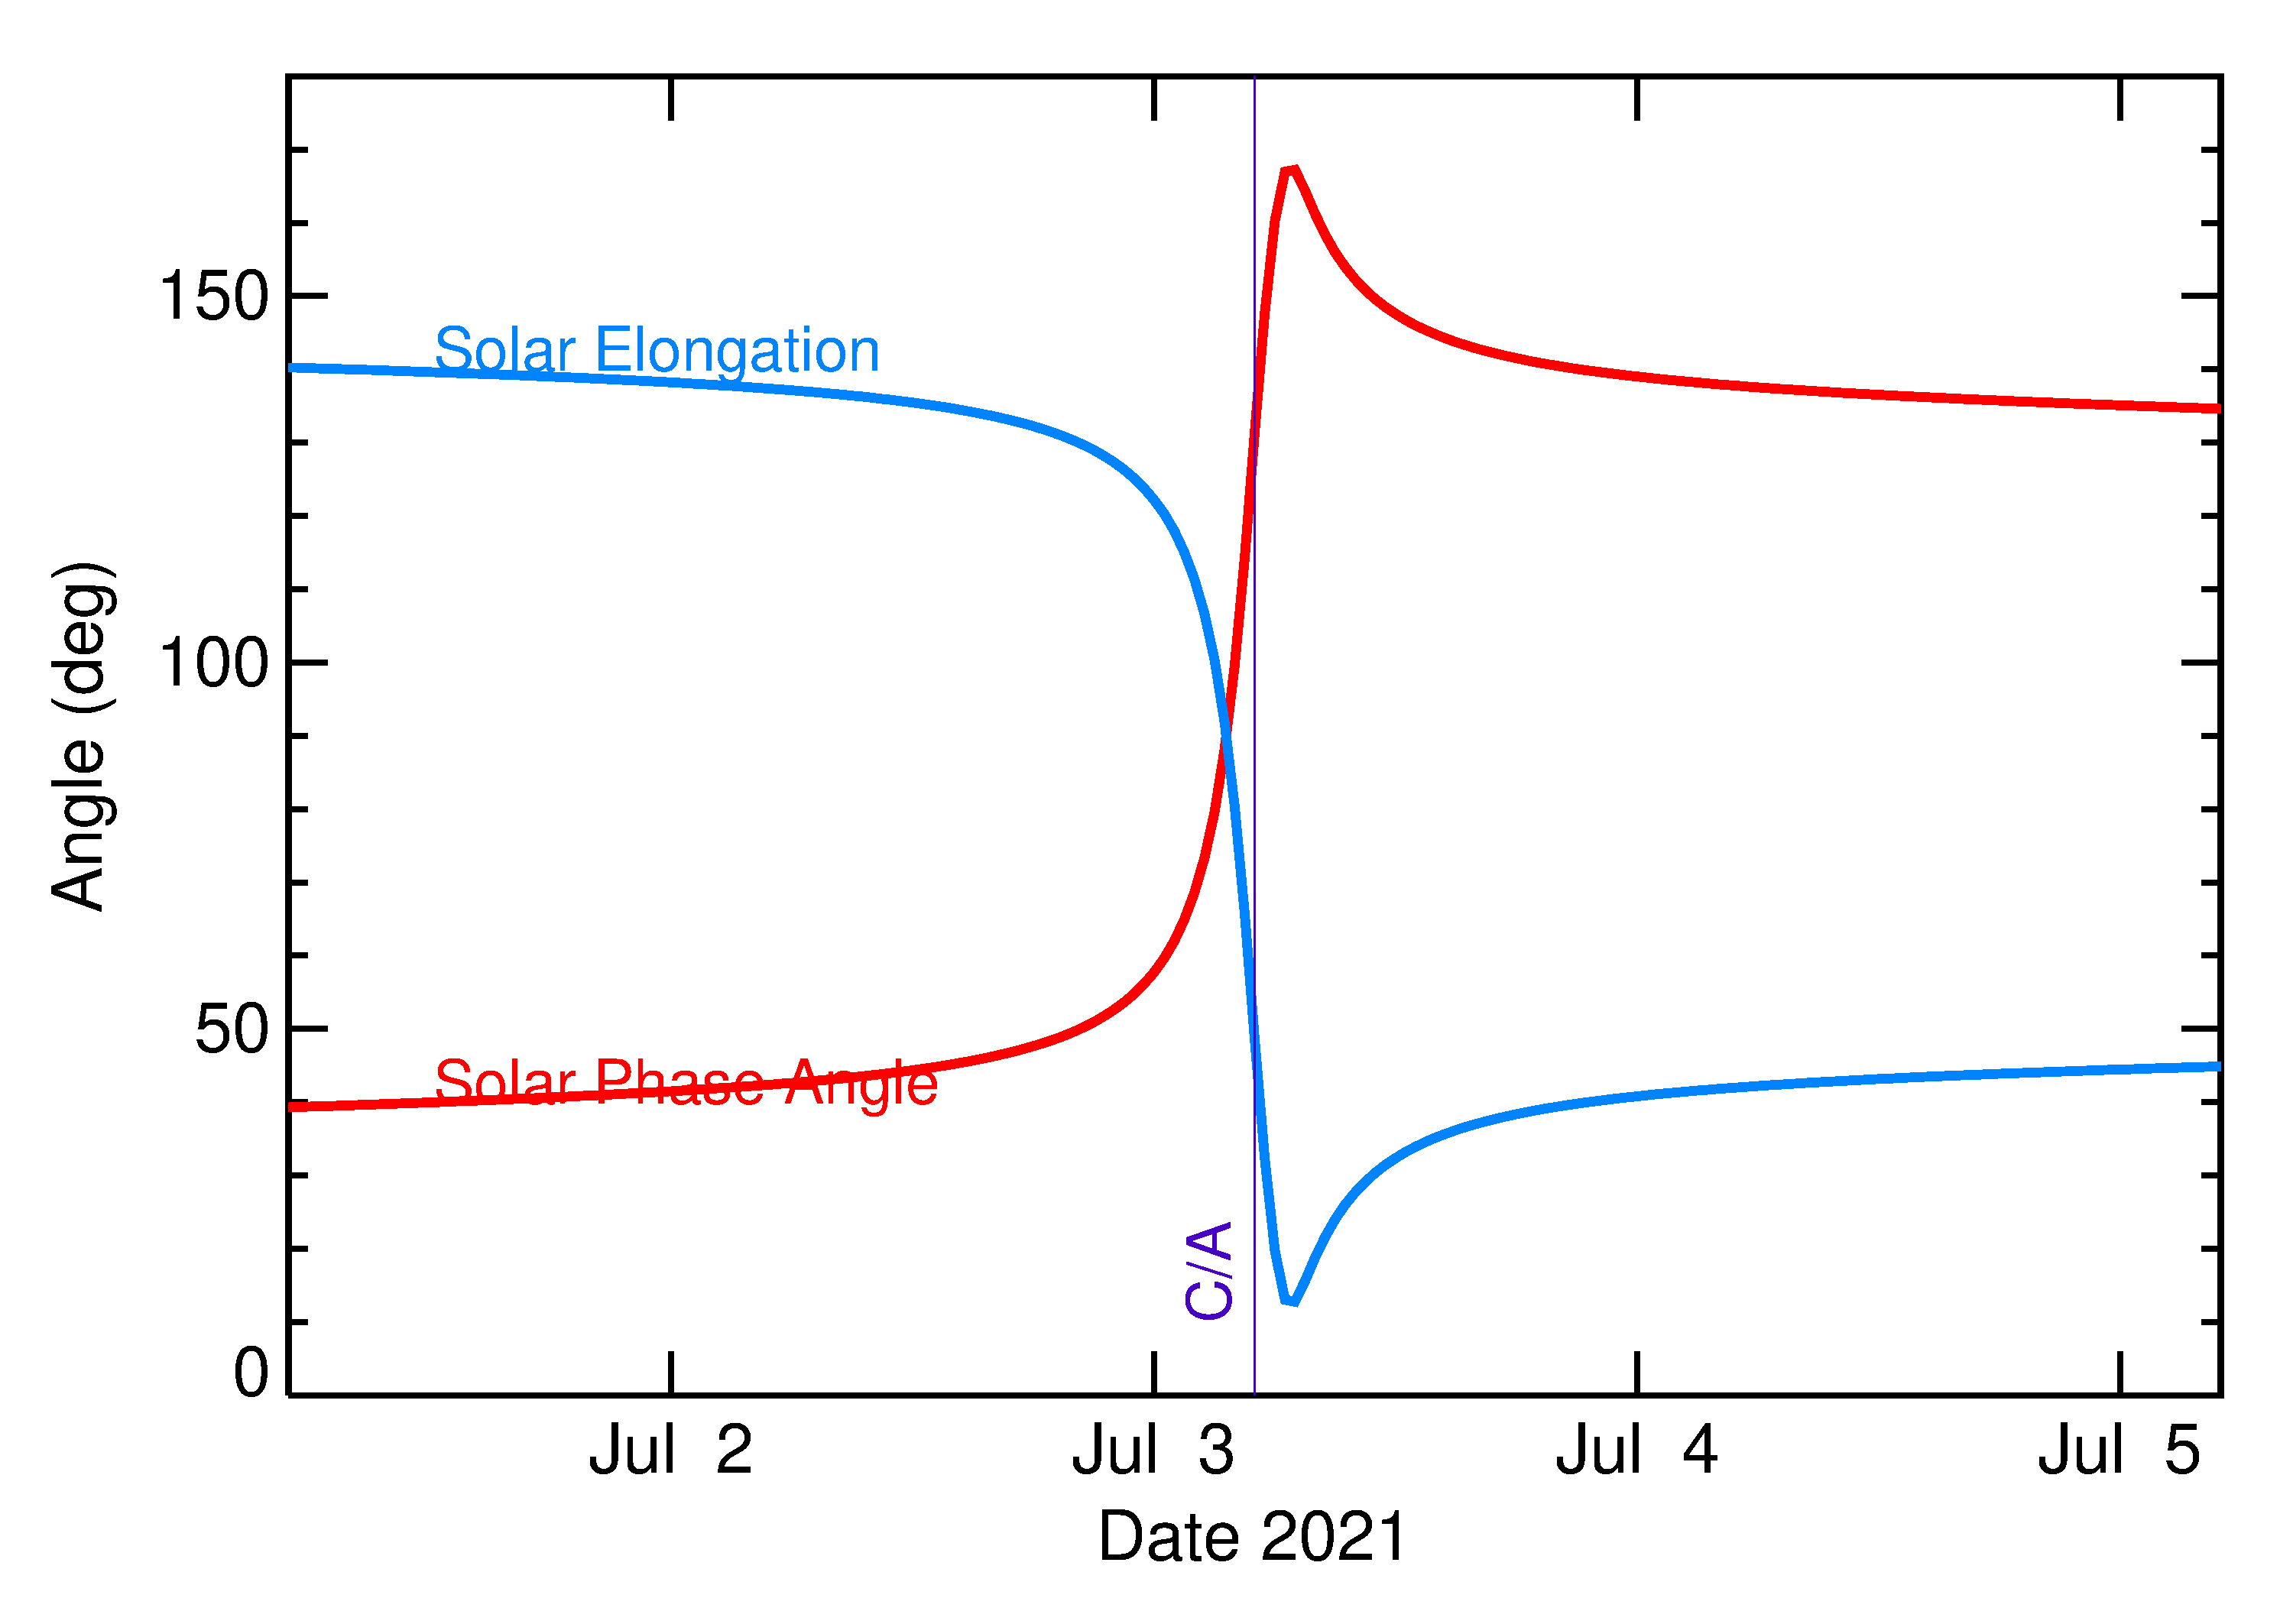 Solar Elongation and Solar Phase Angle of 2021 NA in the days around closest approach